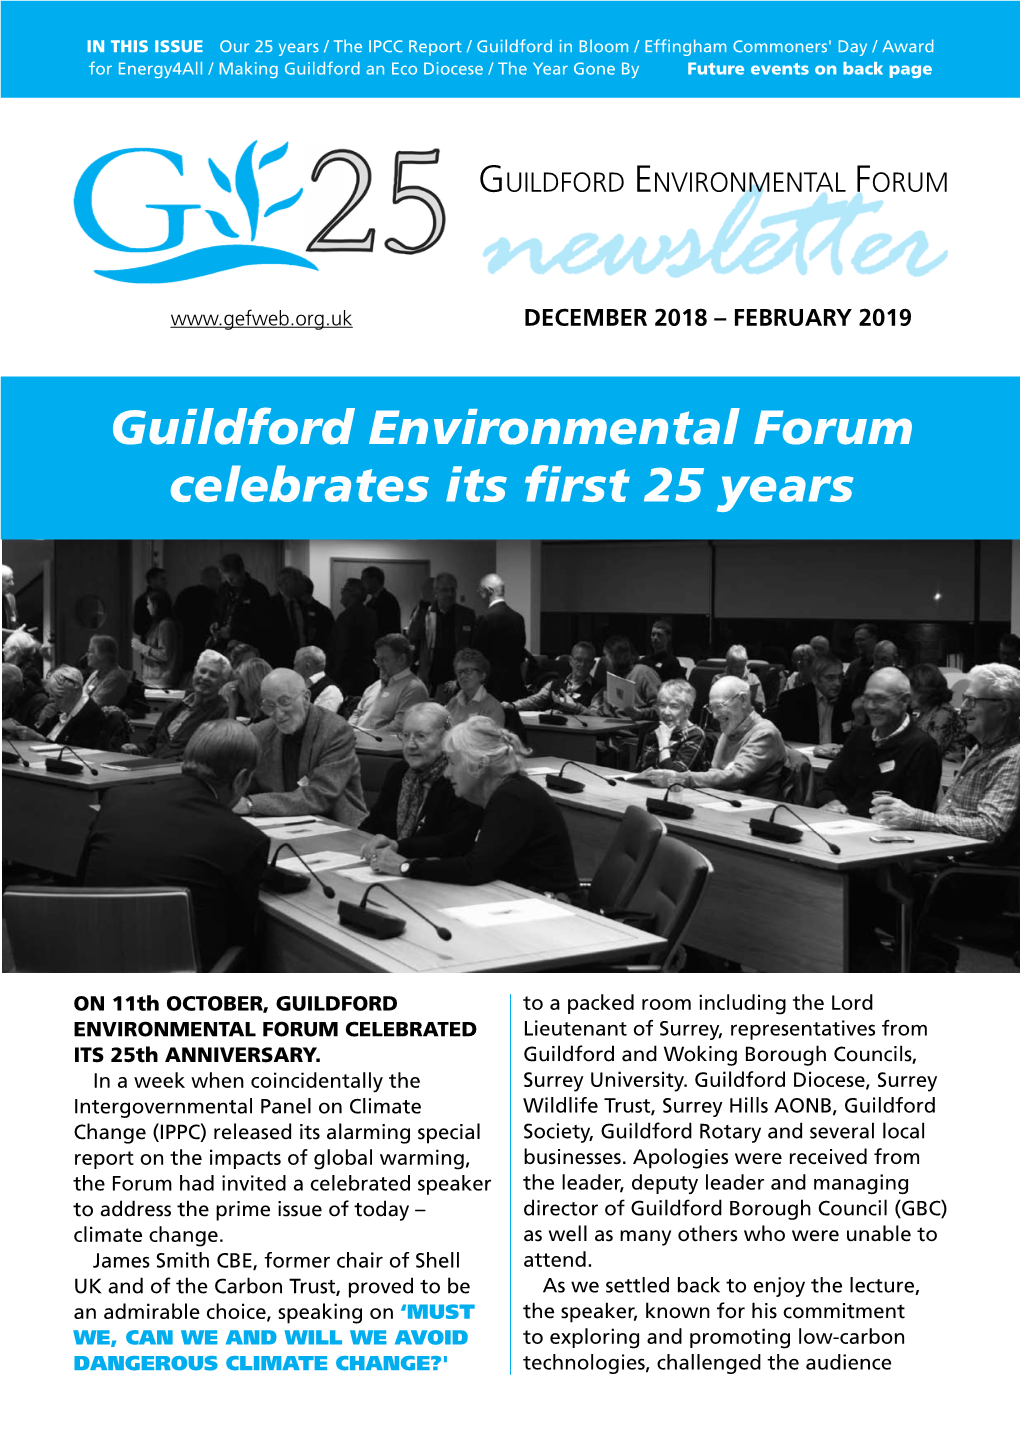 Guildford Environmental Forum Celebrates Its First 25 Years